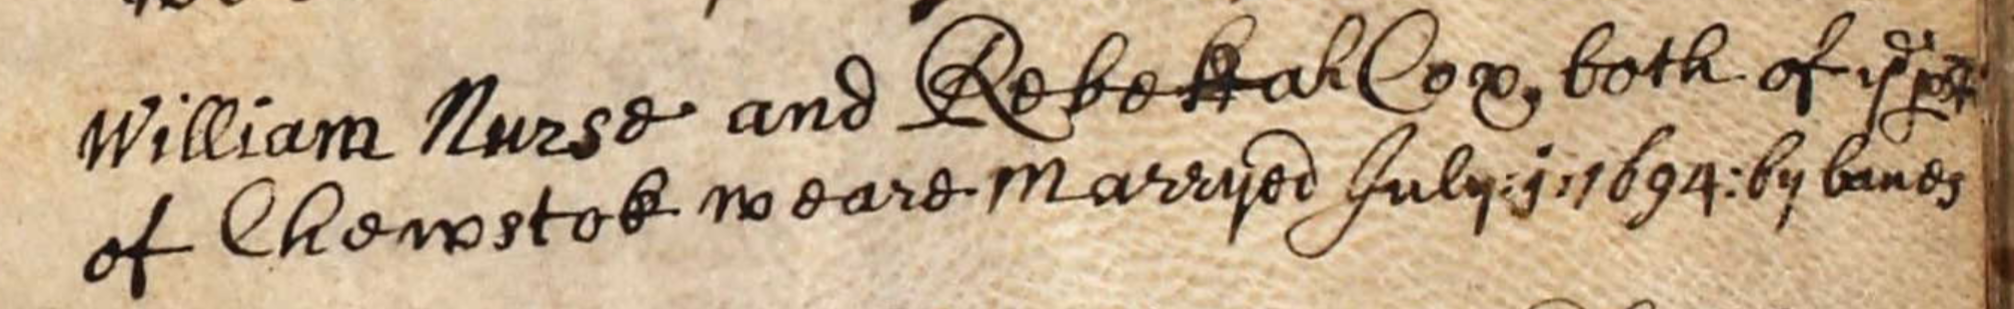 Figure 2: Marriage Register Entry for William Nurse and Rebecca Cox